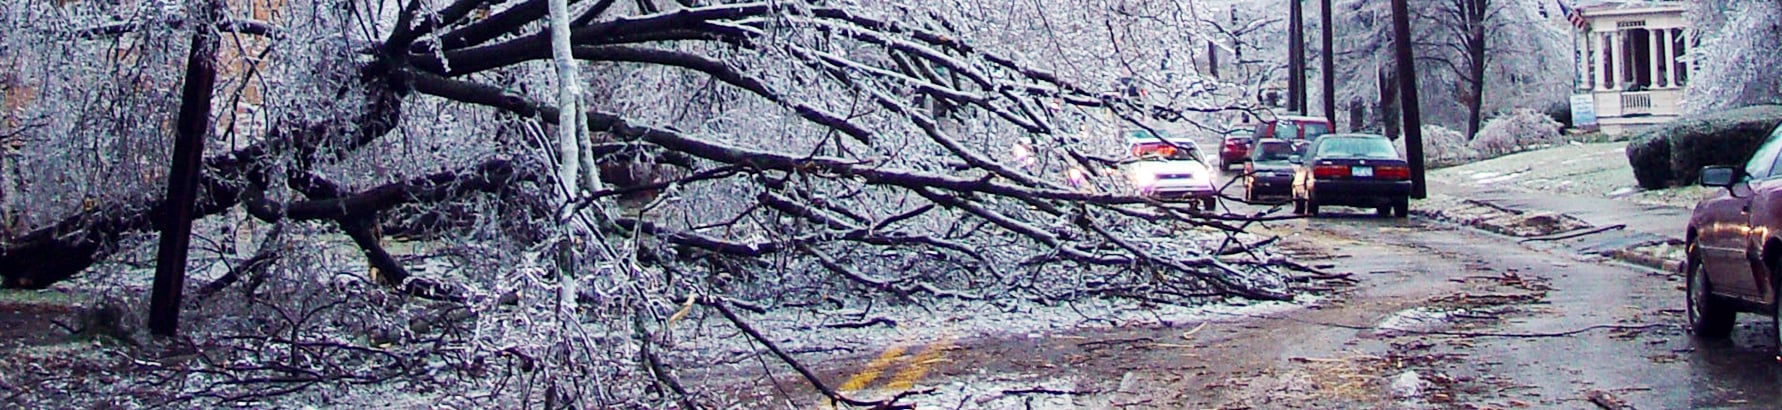 Tree downed by ice storm